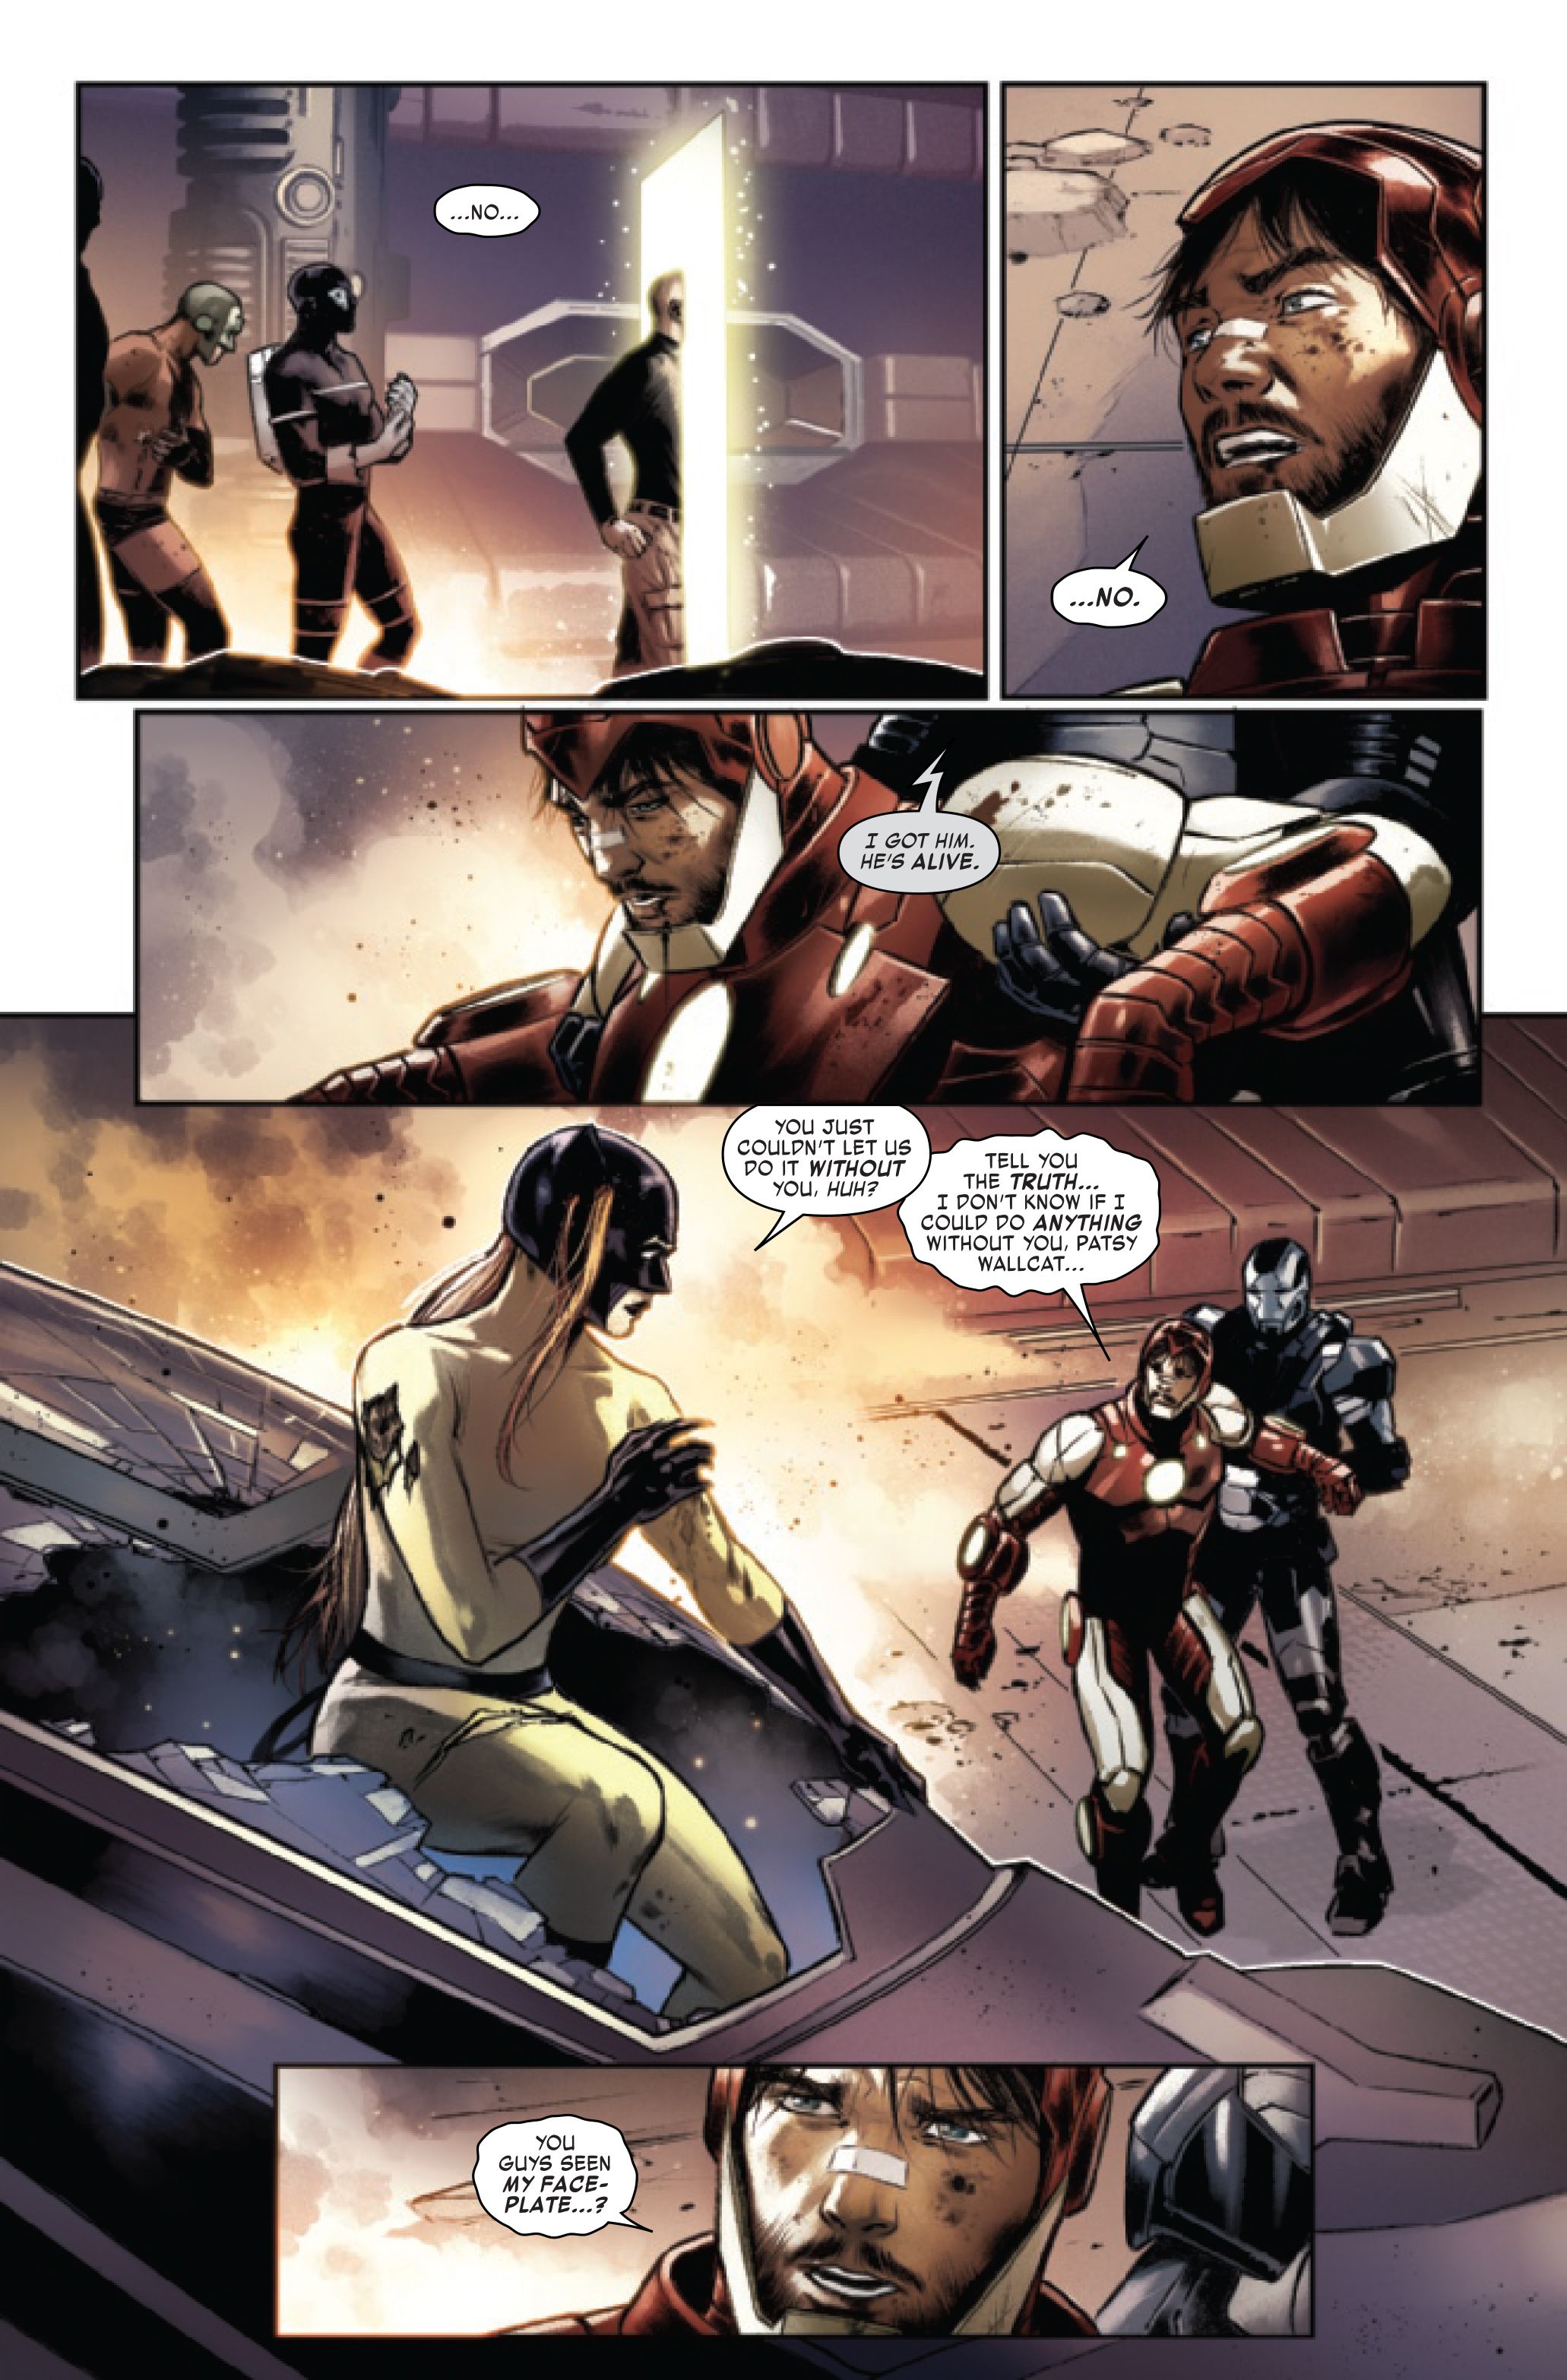 Page 3 of Iron Man #13, by Christopher Cantwell and Cafu.